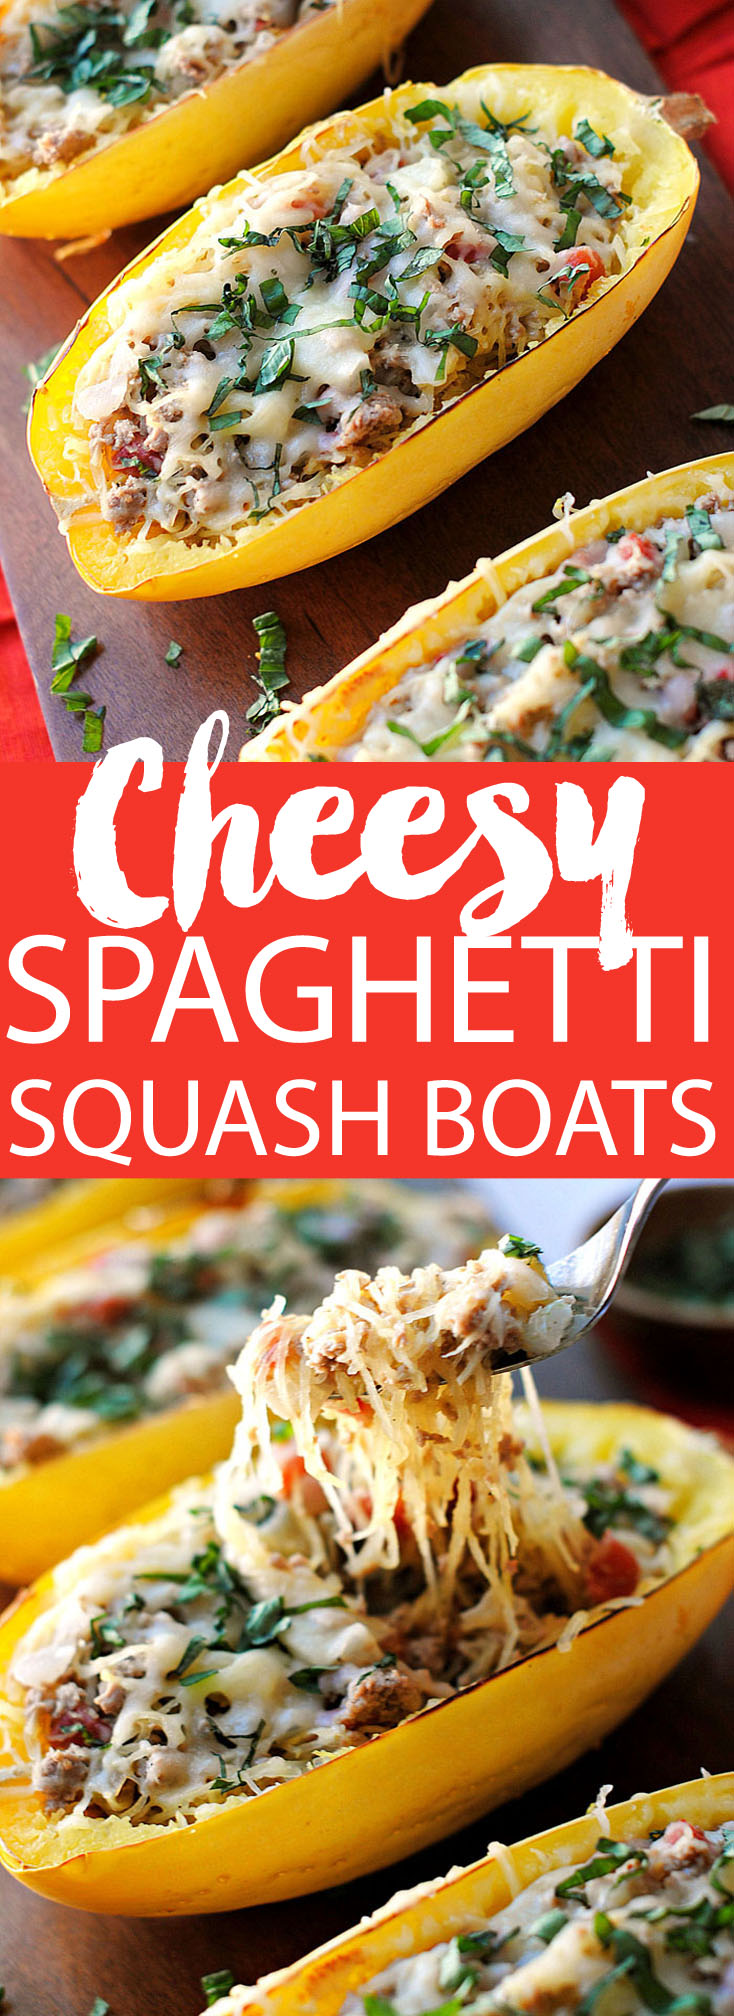 Cheese Spaghetti Squash Boats with Spicy Sausage, a family favorite! | Eat Yourself Skinny